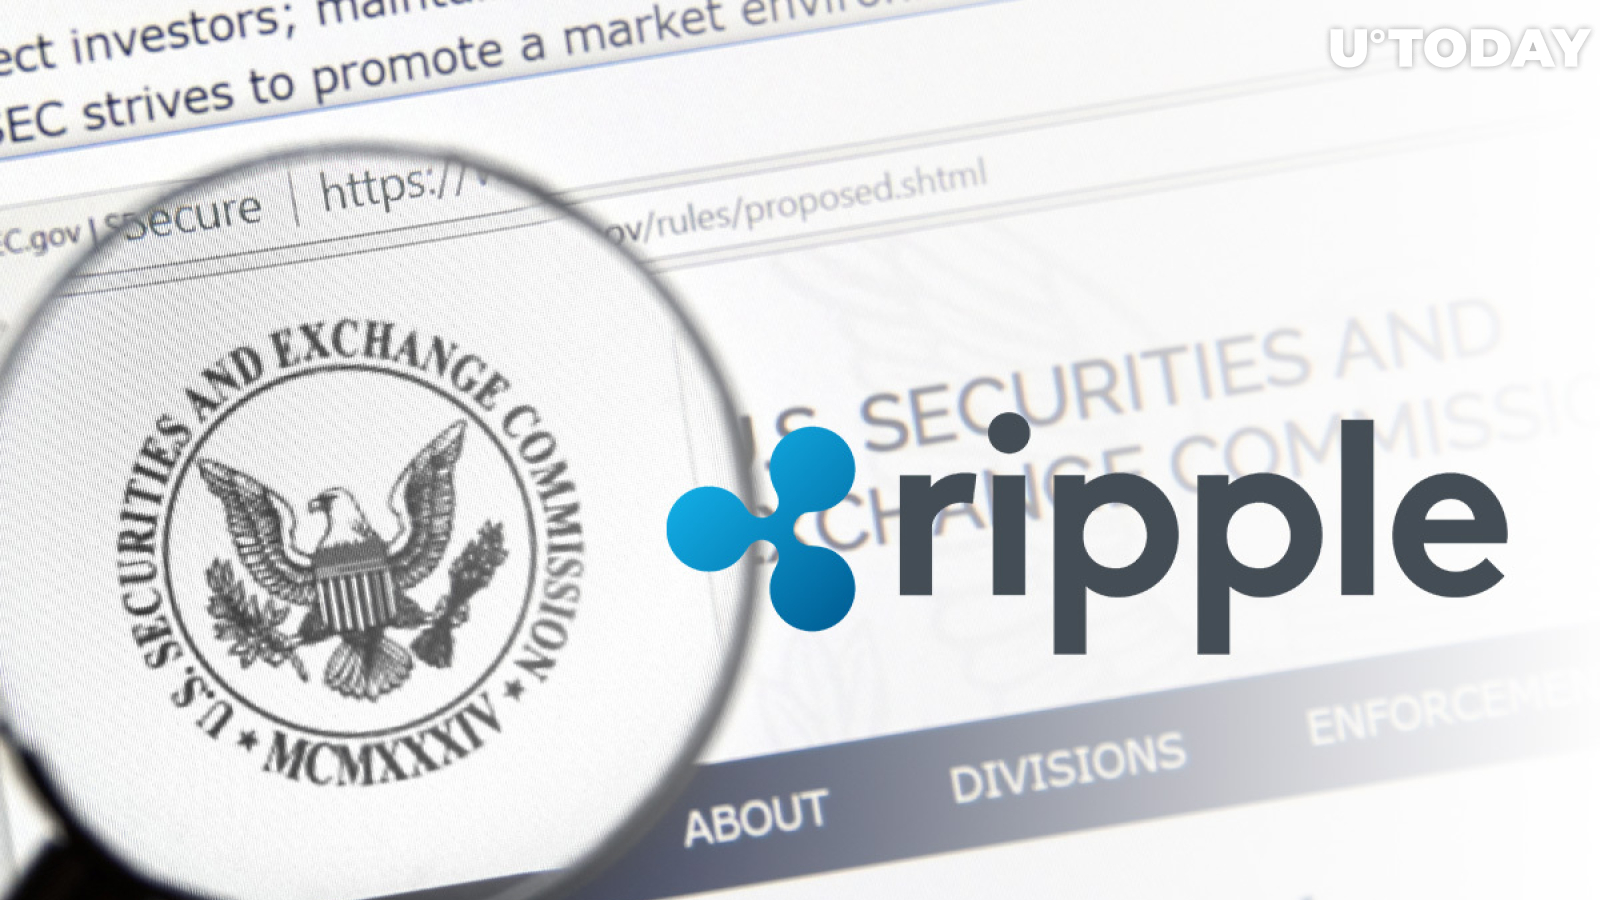 Judge OKs Discovery Extension That Poses "Existential Threat" to Ripple's Business